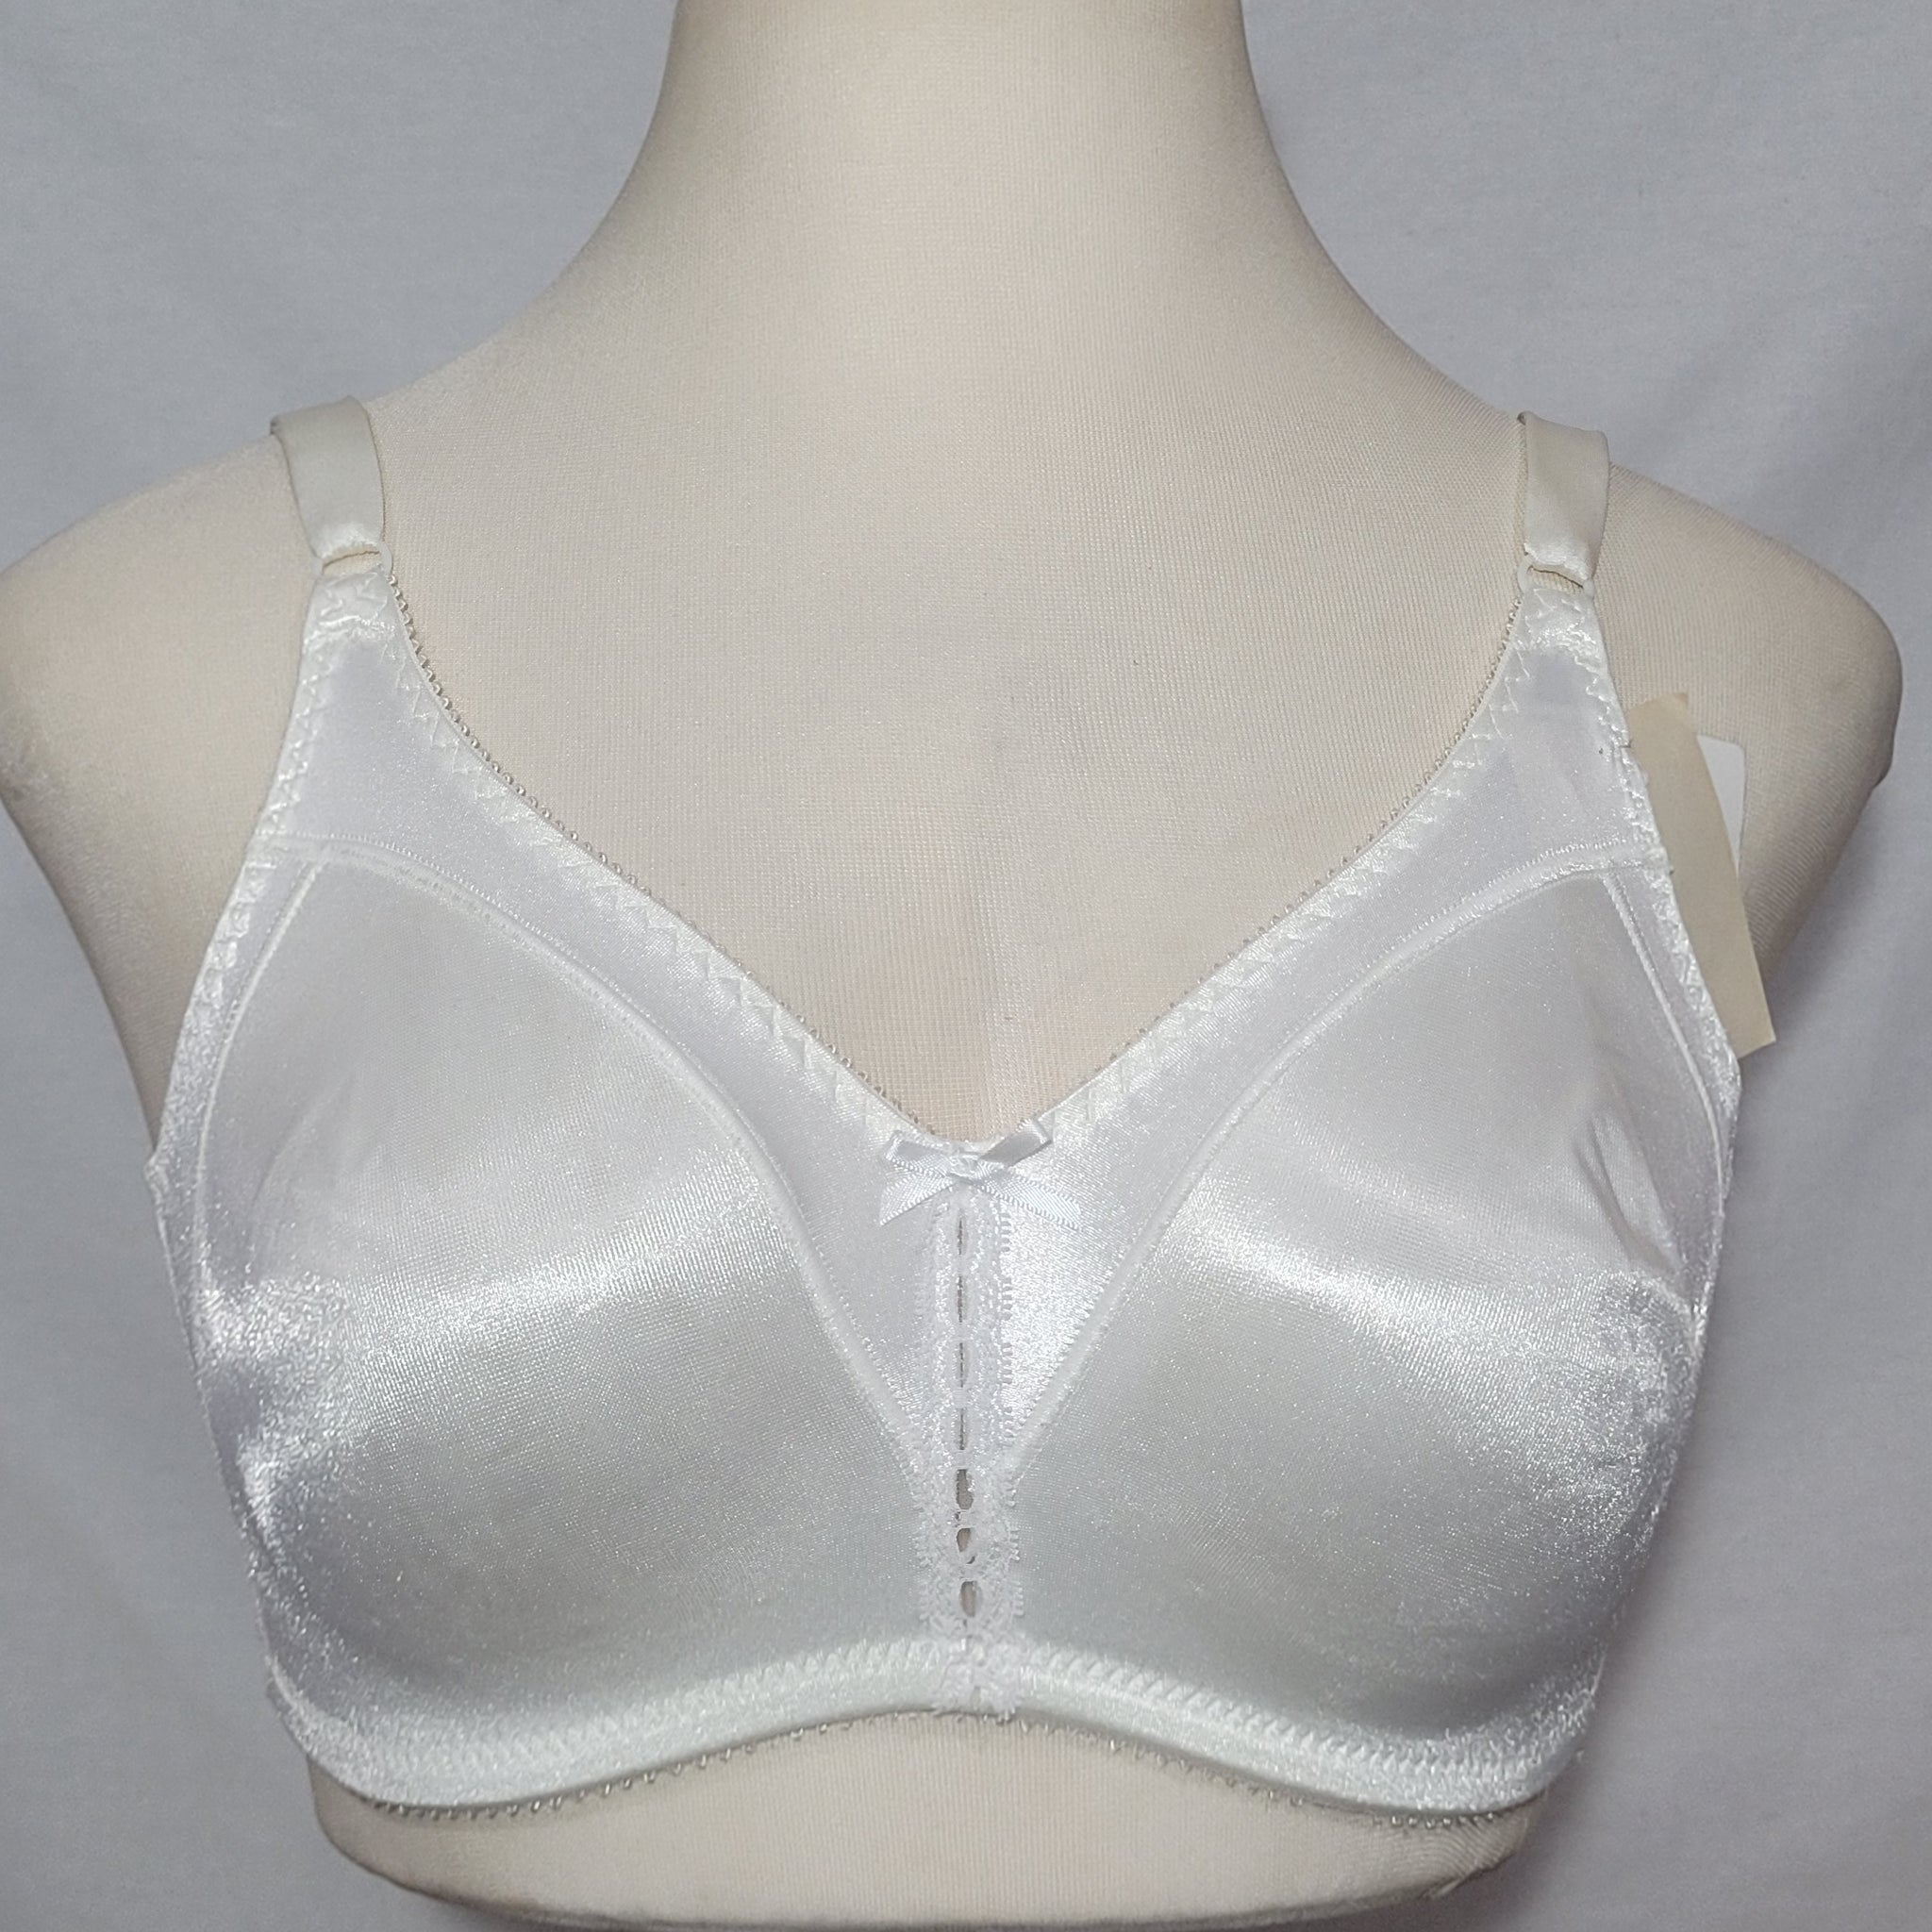 Bali 3820 S121 Double Support Wirefree Bra 36D White NEW